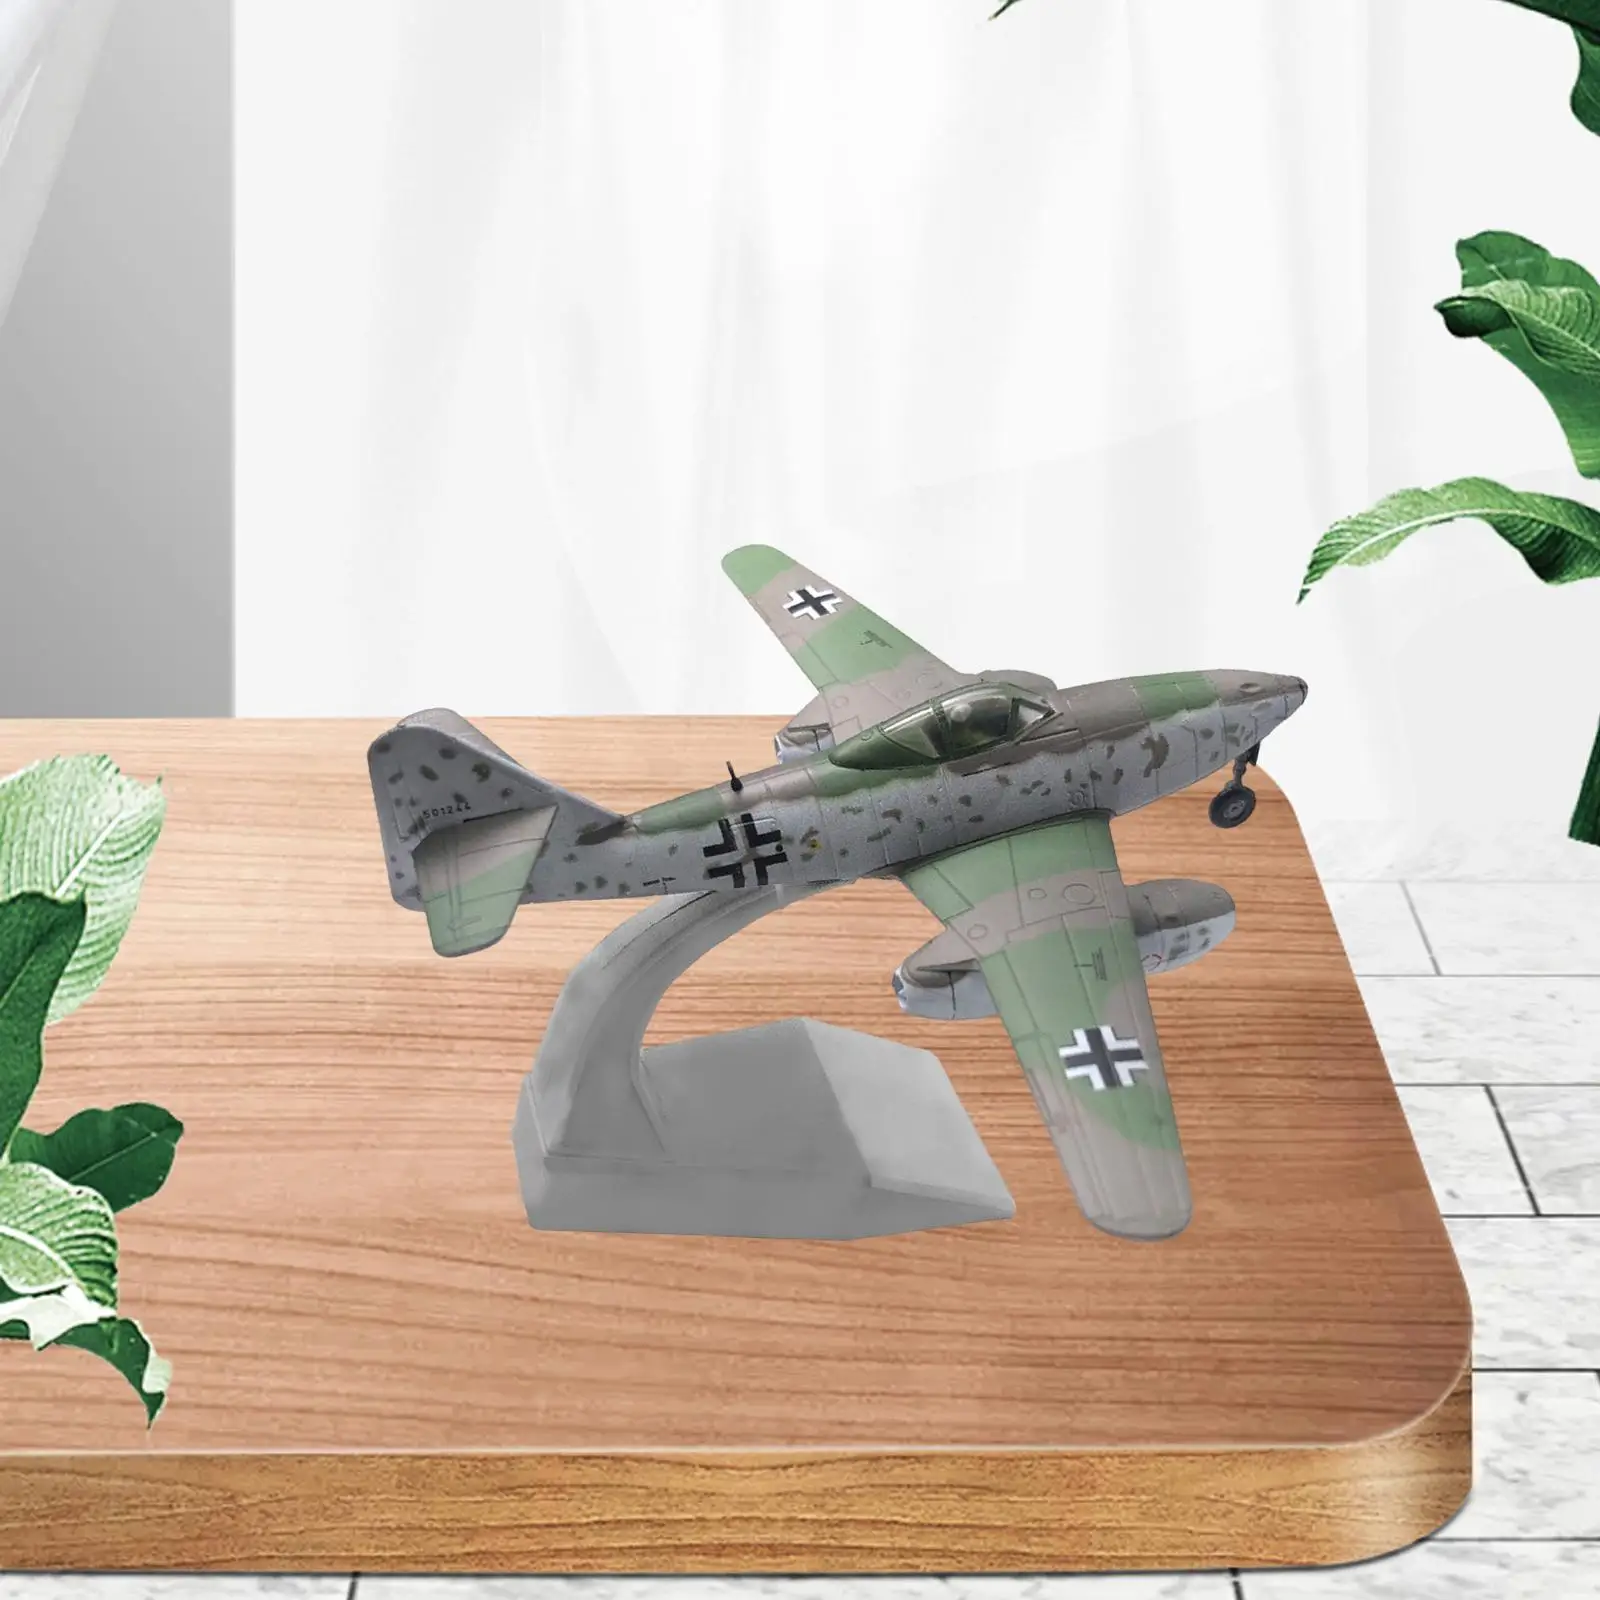 

Alloy German Plane Model Display Ornaments Collectables Ornaments Fighter Model for Home Office Collectibles Ornament Souvenir